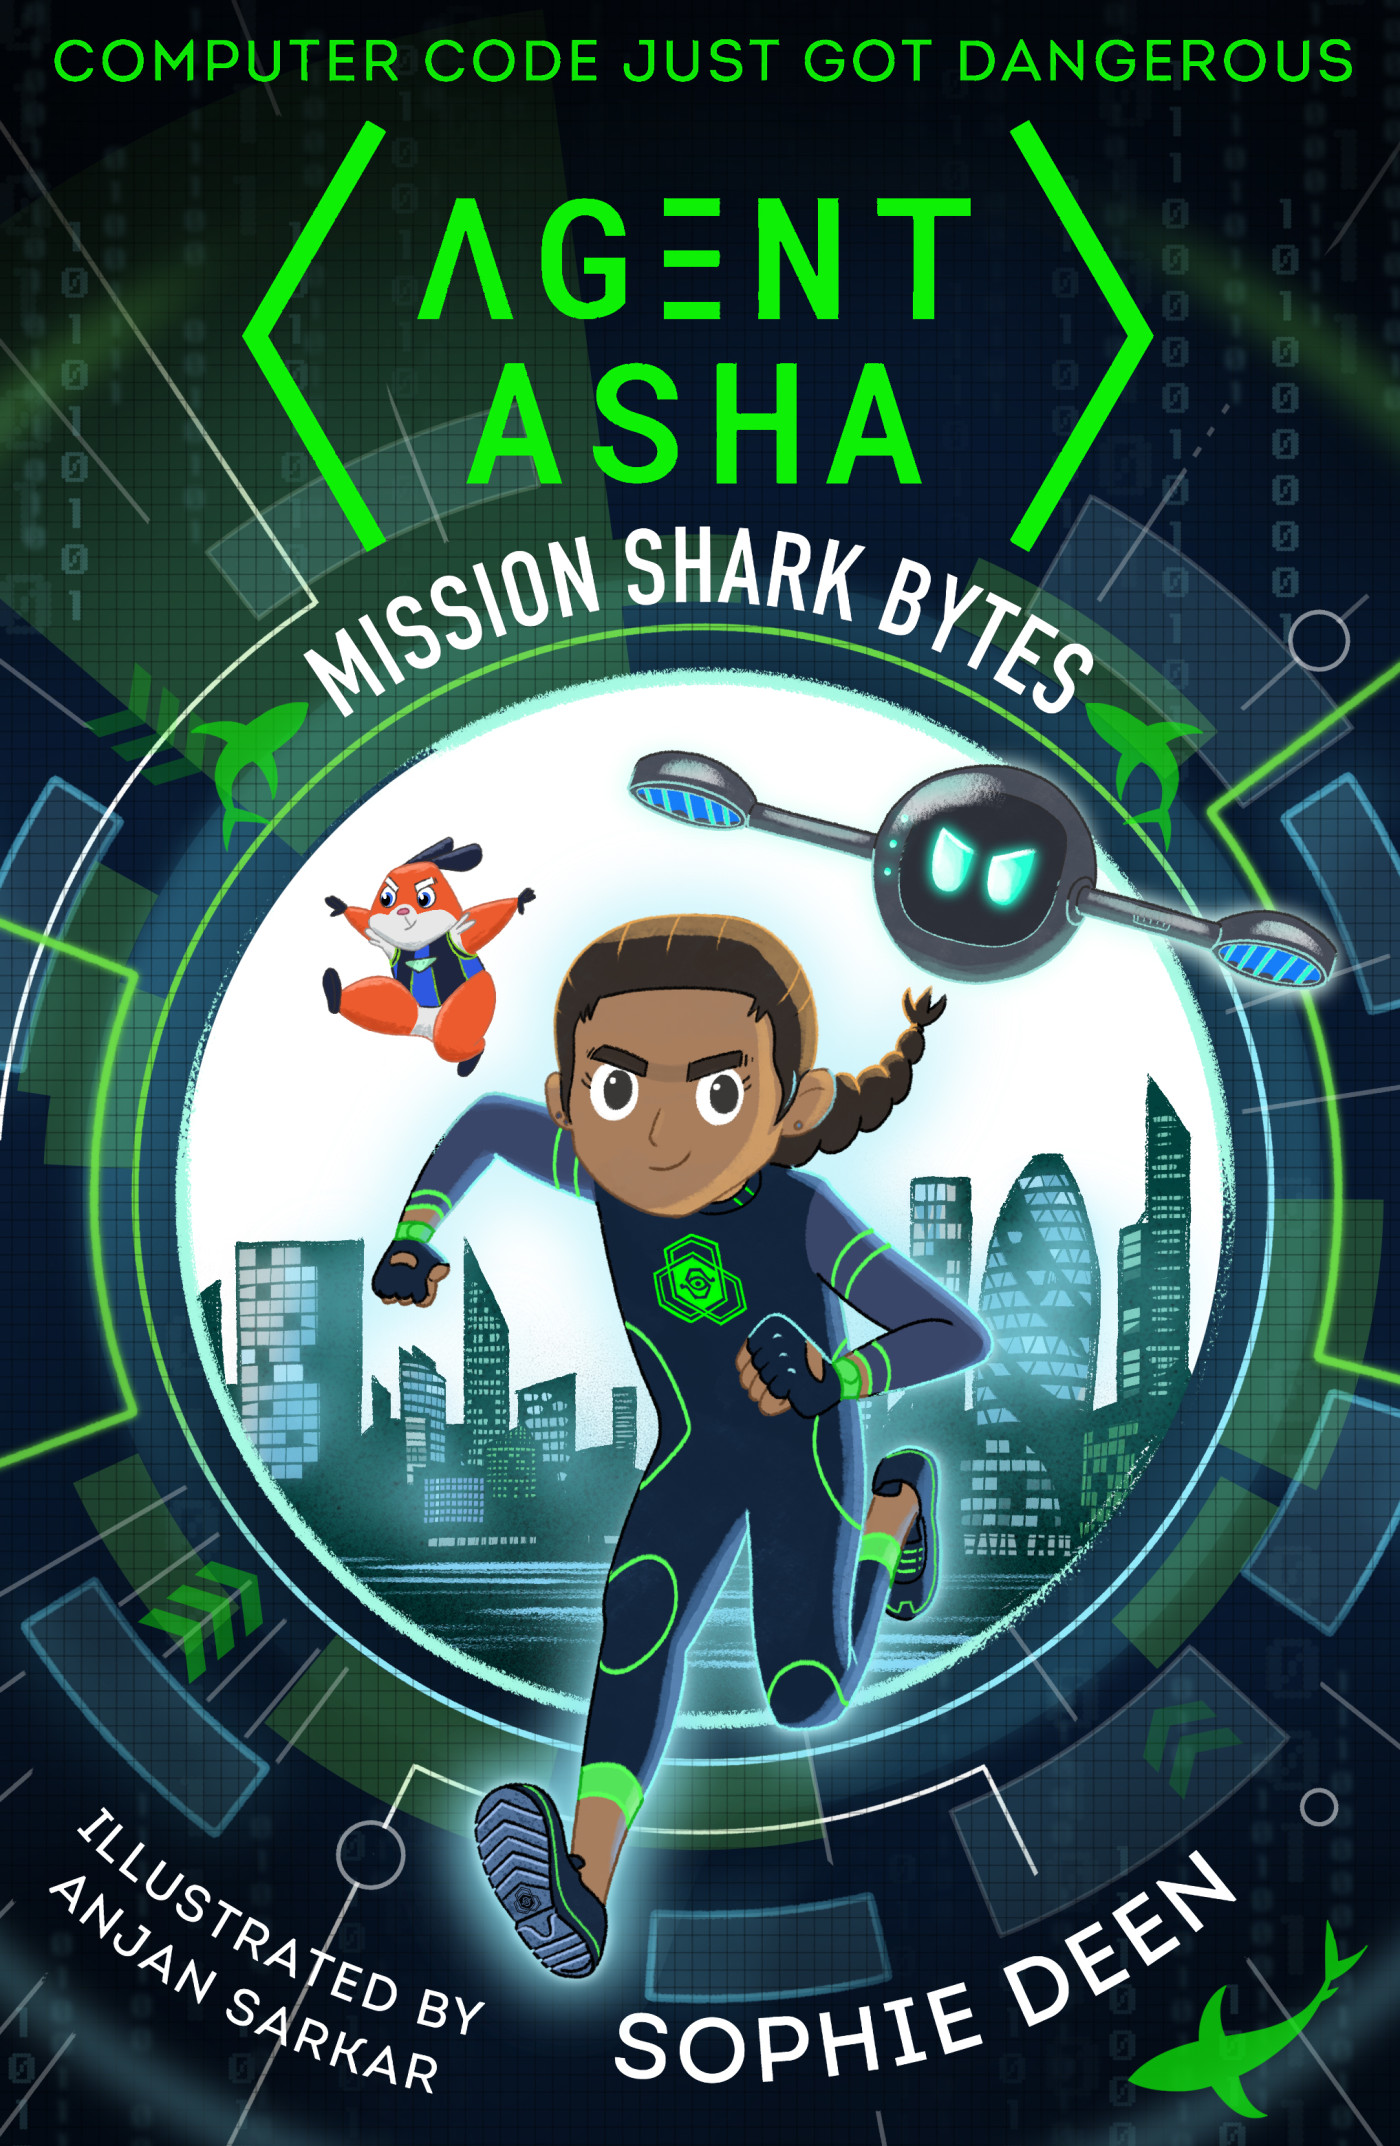 Image of a book cover that depicts a girl, hamster, and robot in green and black outfits. Title reads agent Asha, coding just got dangerous.